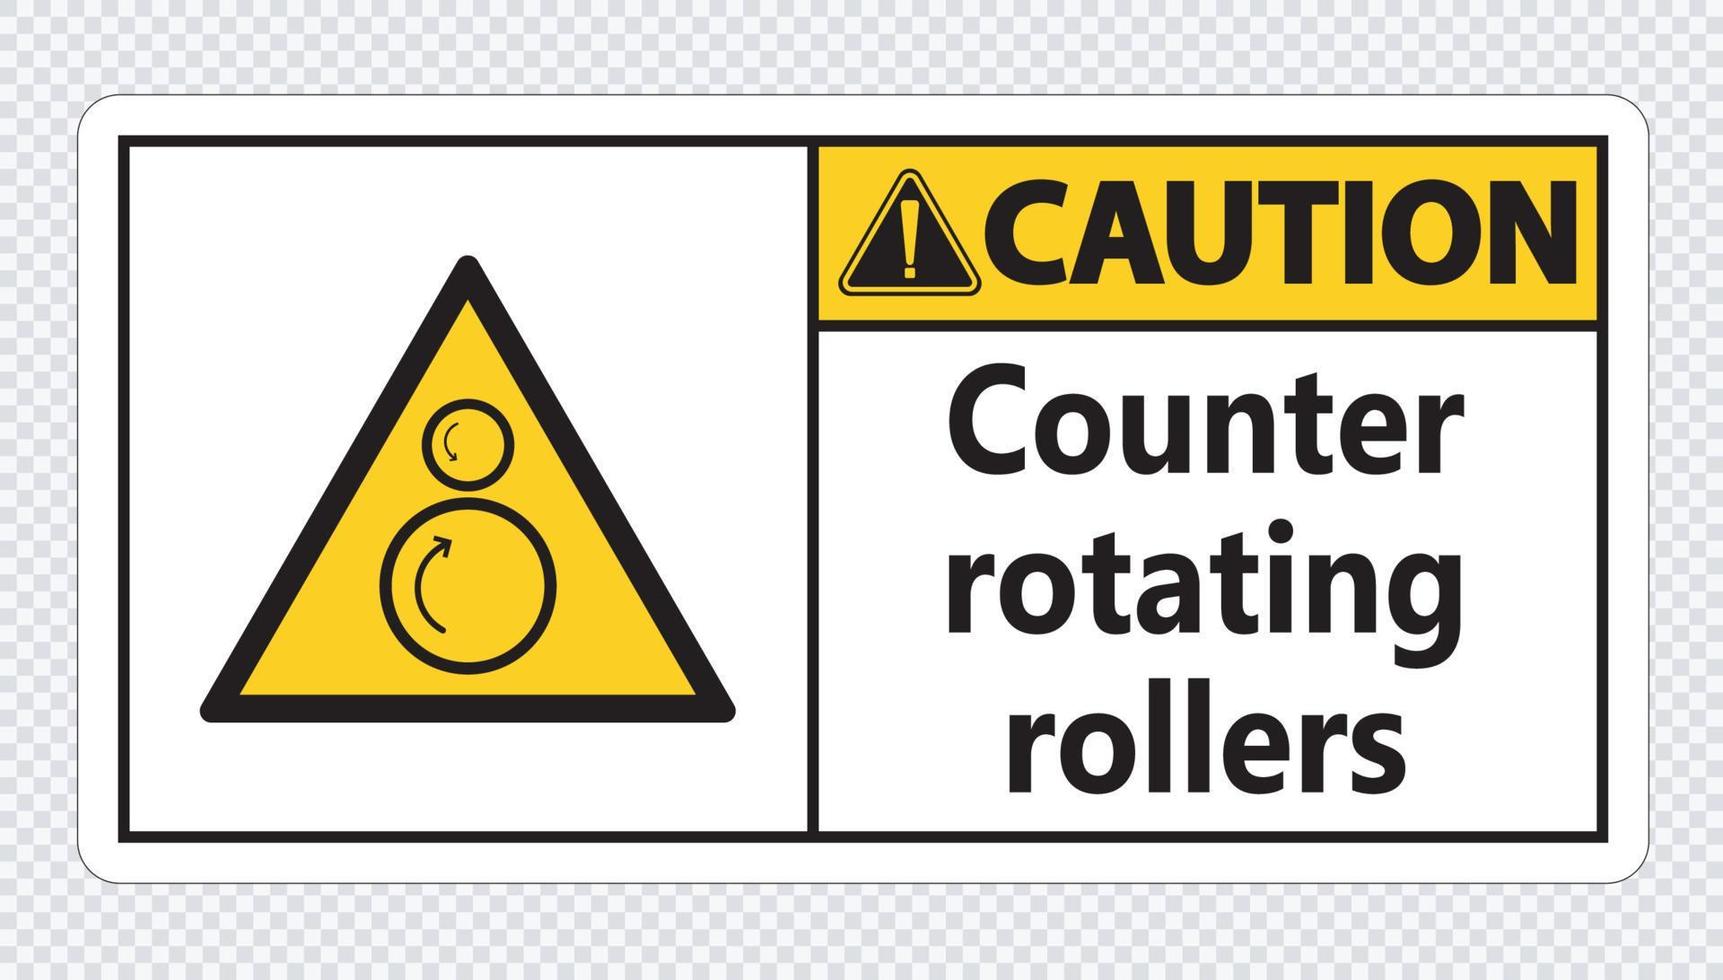 Caution counter rotating rollers sign on transparent background vector